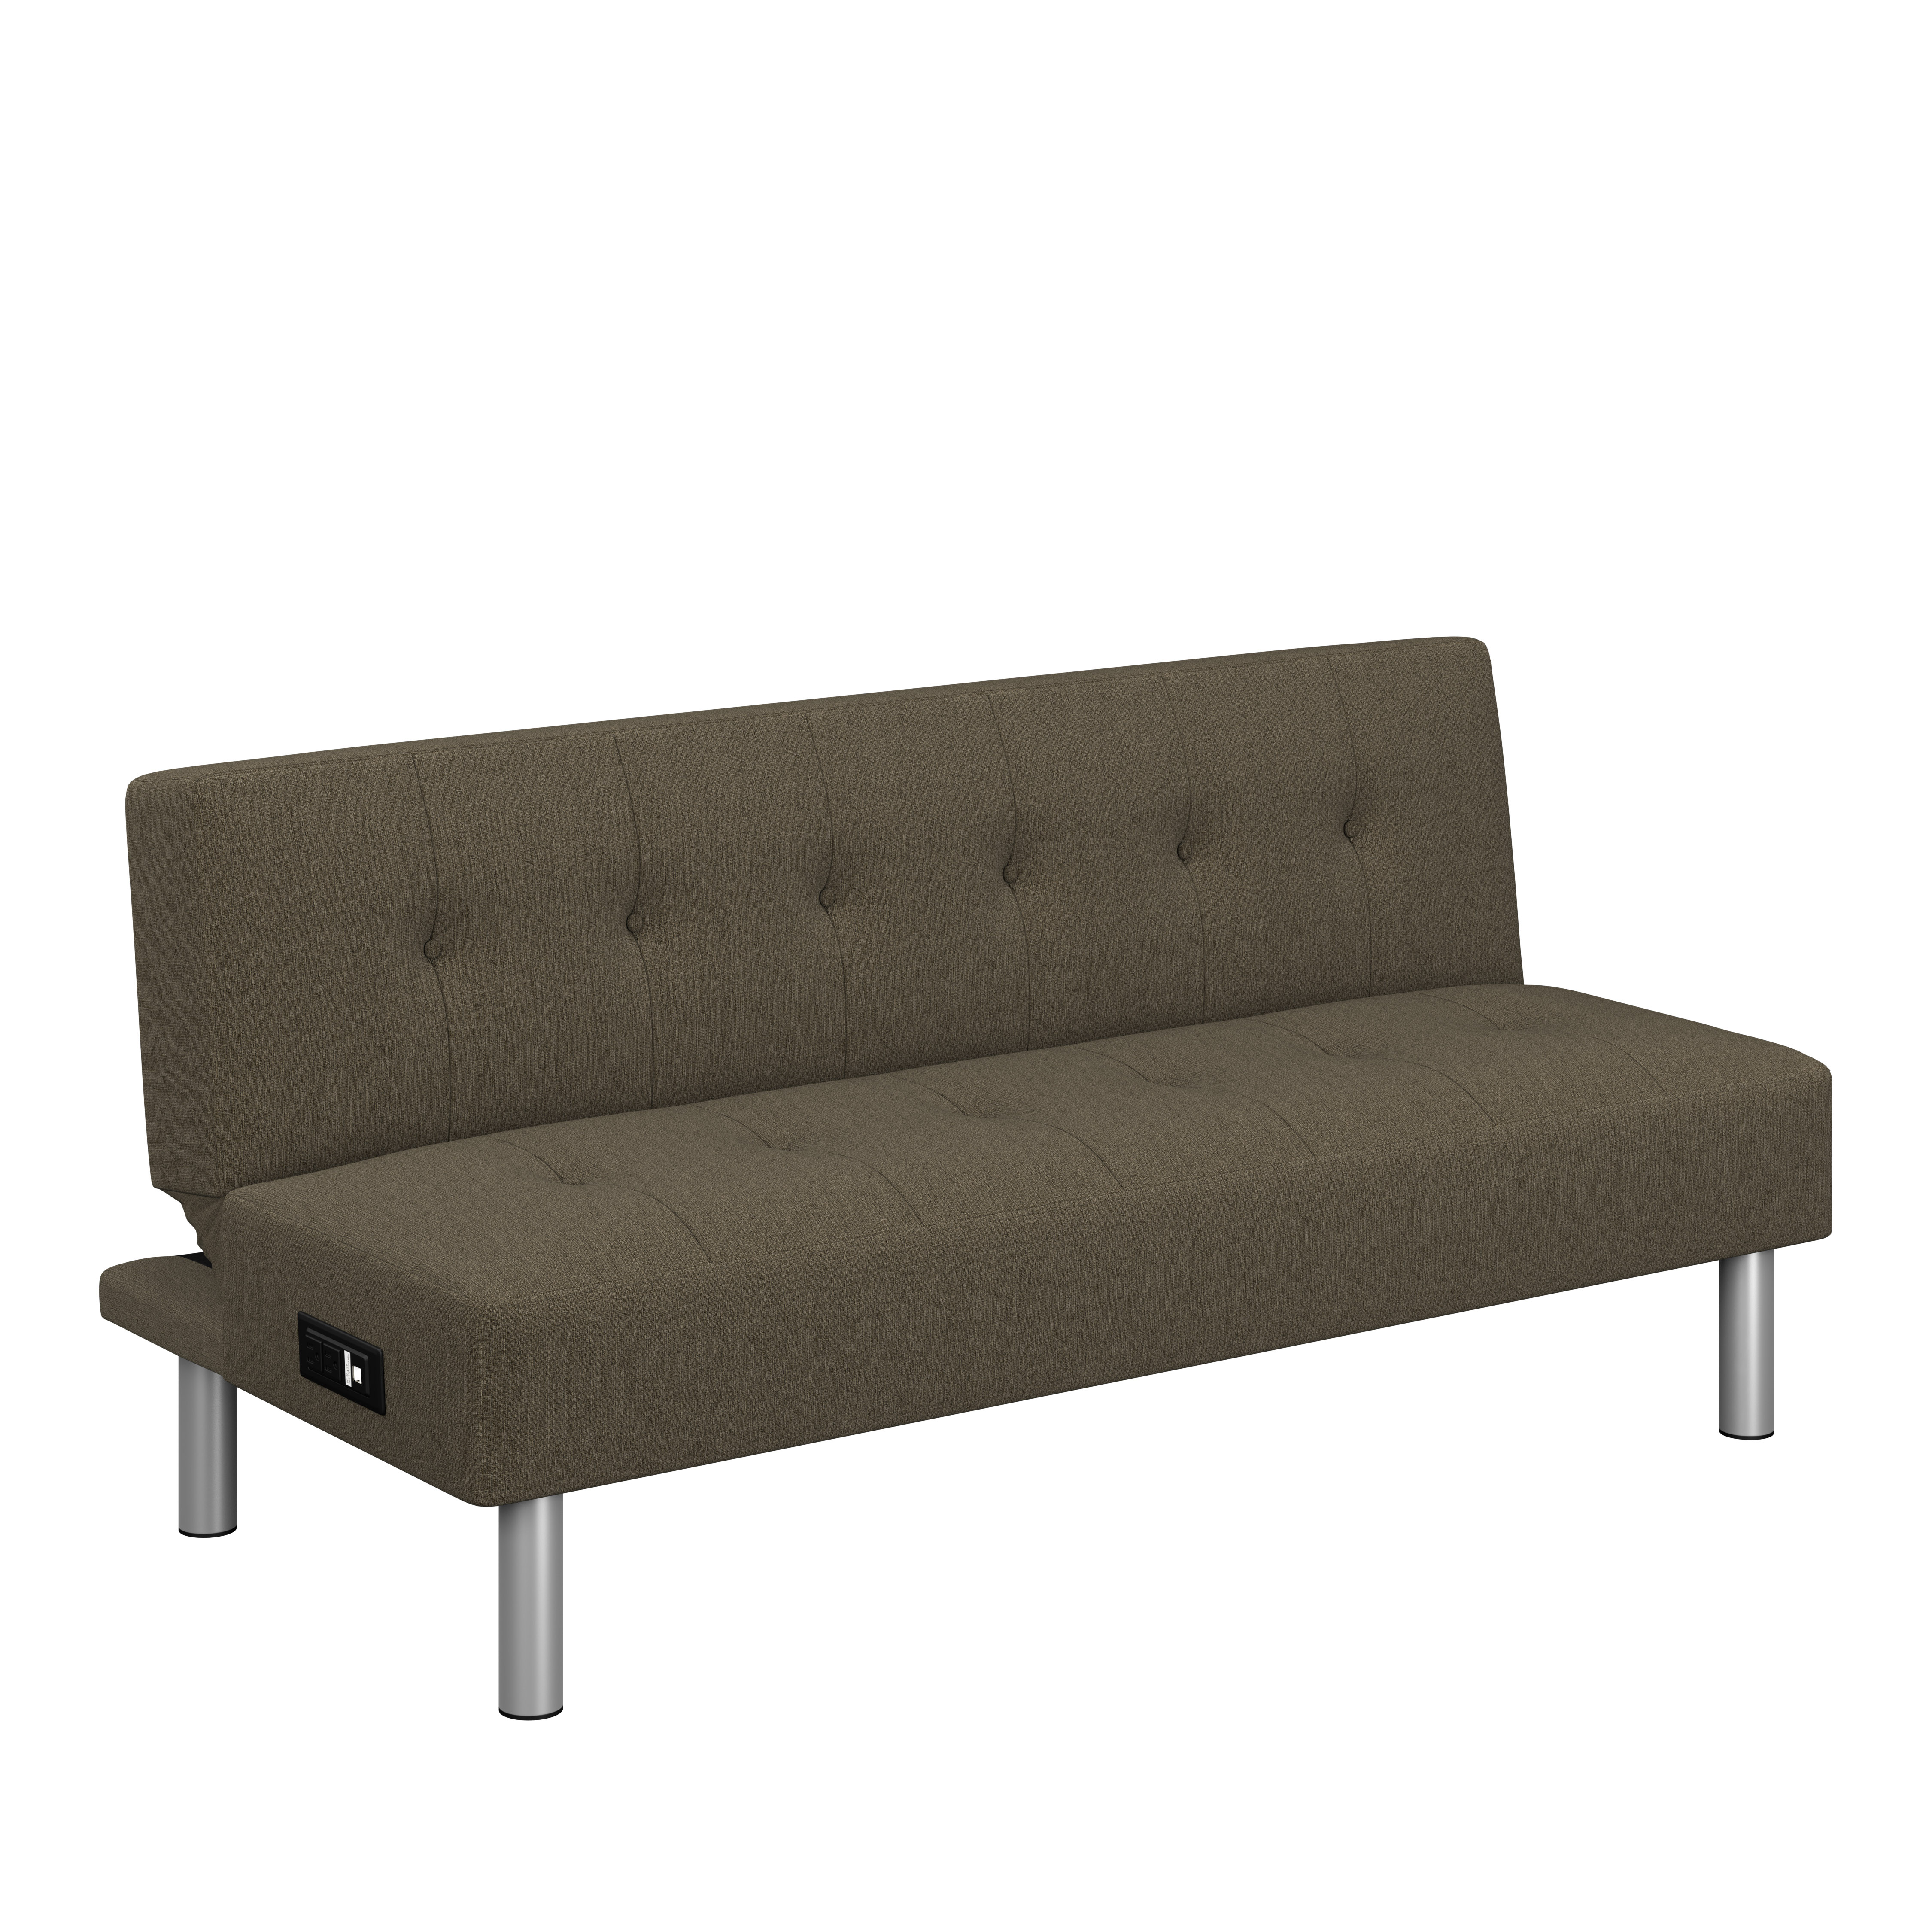 Serta Canon Futon with Power, Brown Fabric - image 3 of 15